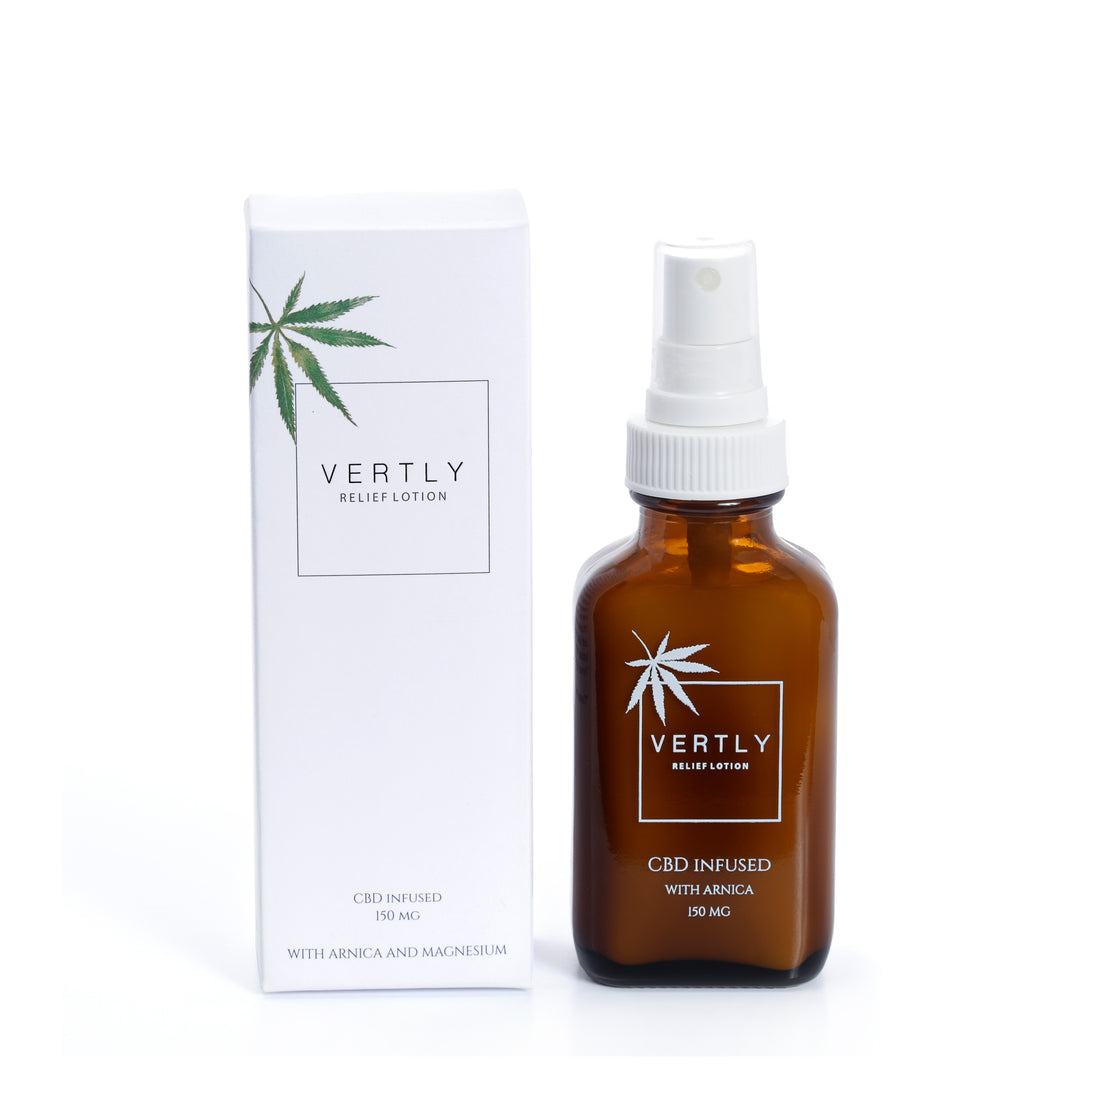 Hemp CBD Infused Relief Lotion Lotion Vertly   